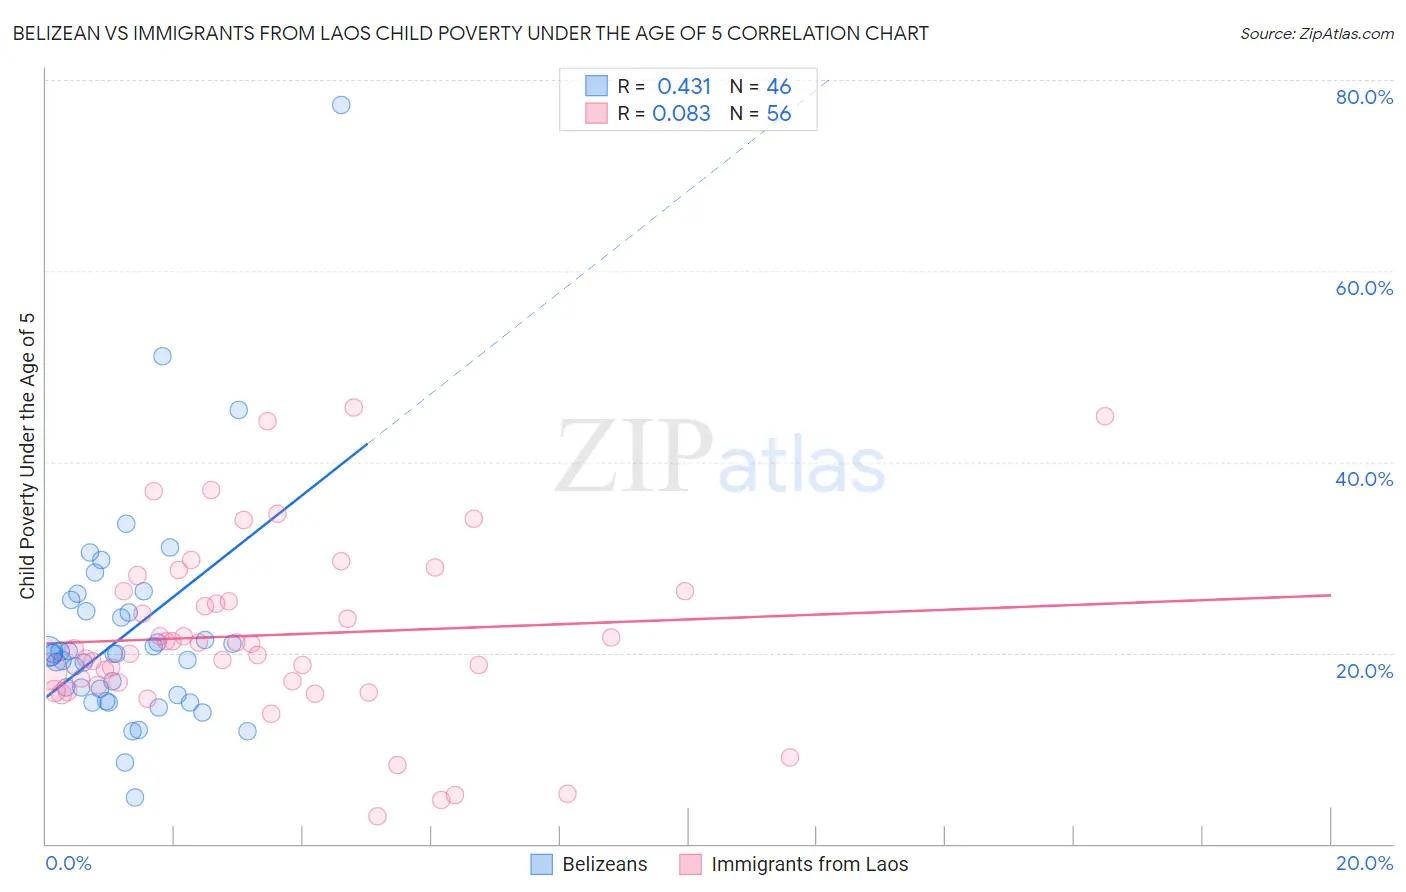 Belizean vs Immigrants from Laos Child Poverty Under the Age of 5